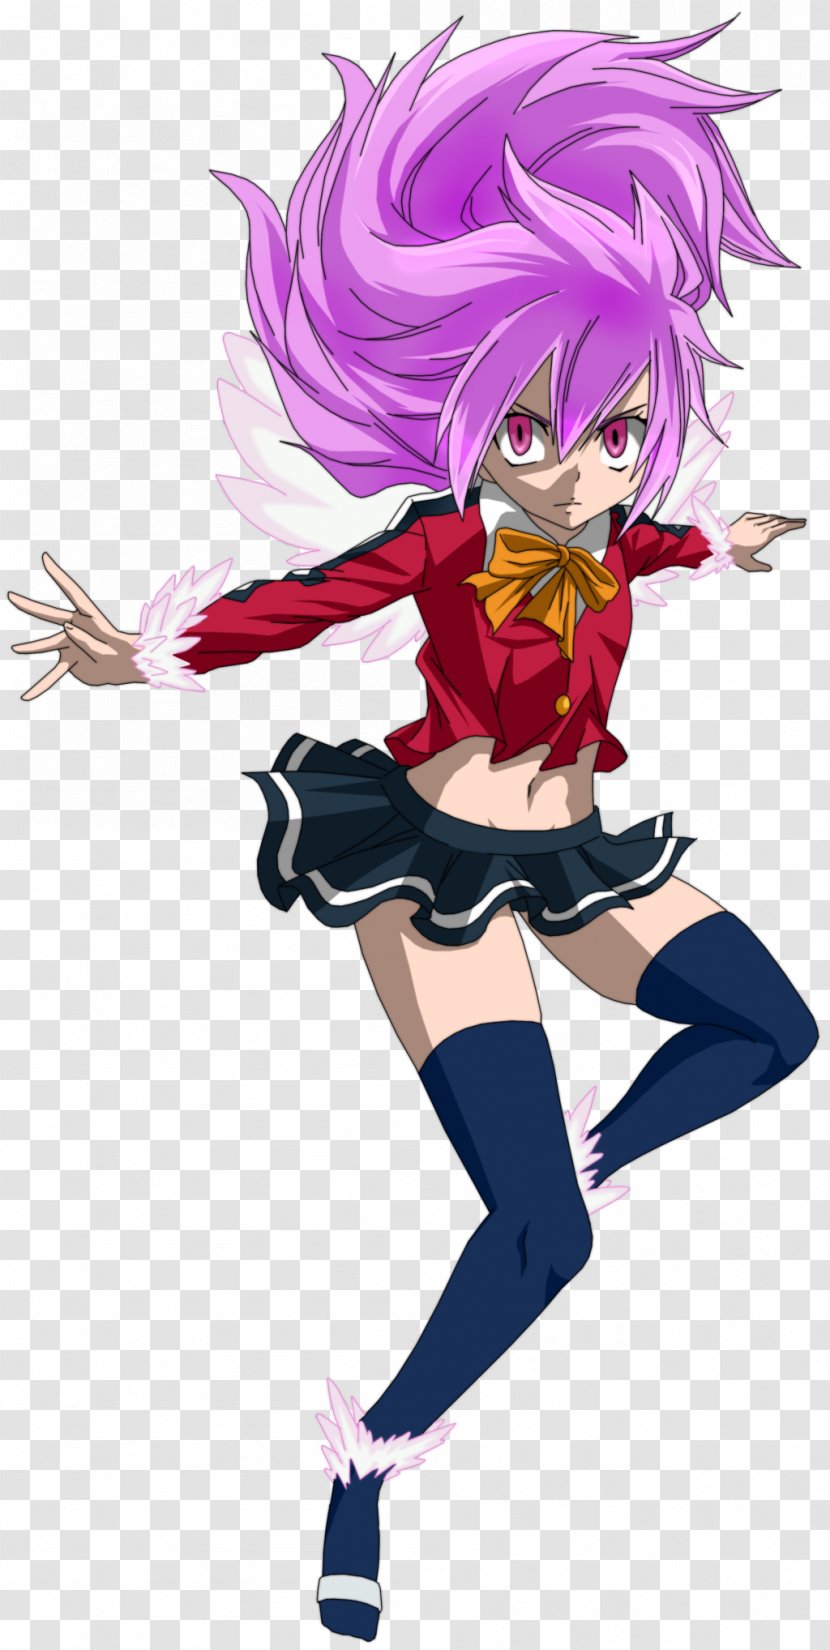 Dragon Force Wendy Marvell Natsu Dragneel Fairy Tail - Frame Transparent PNG